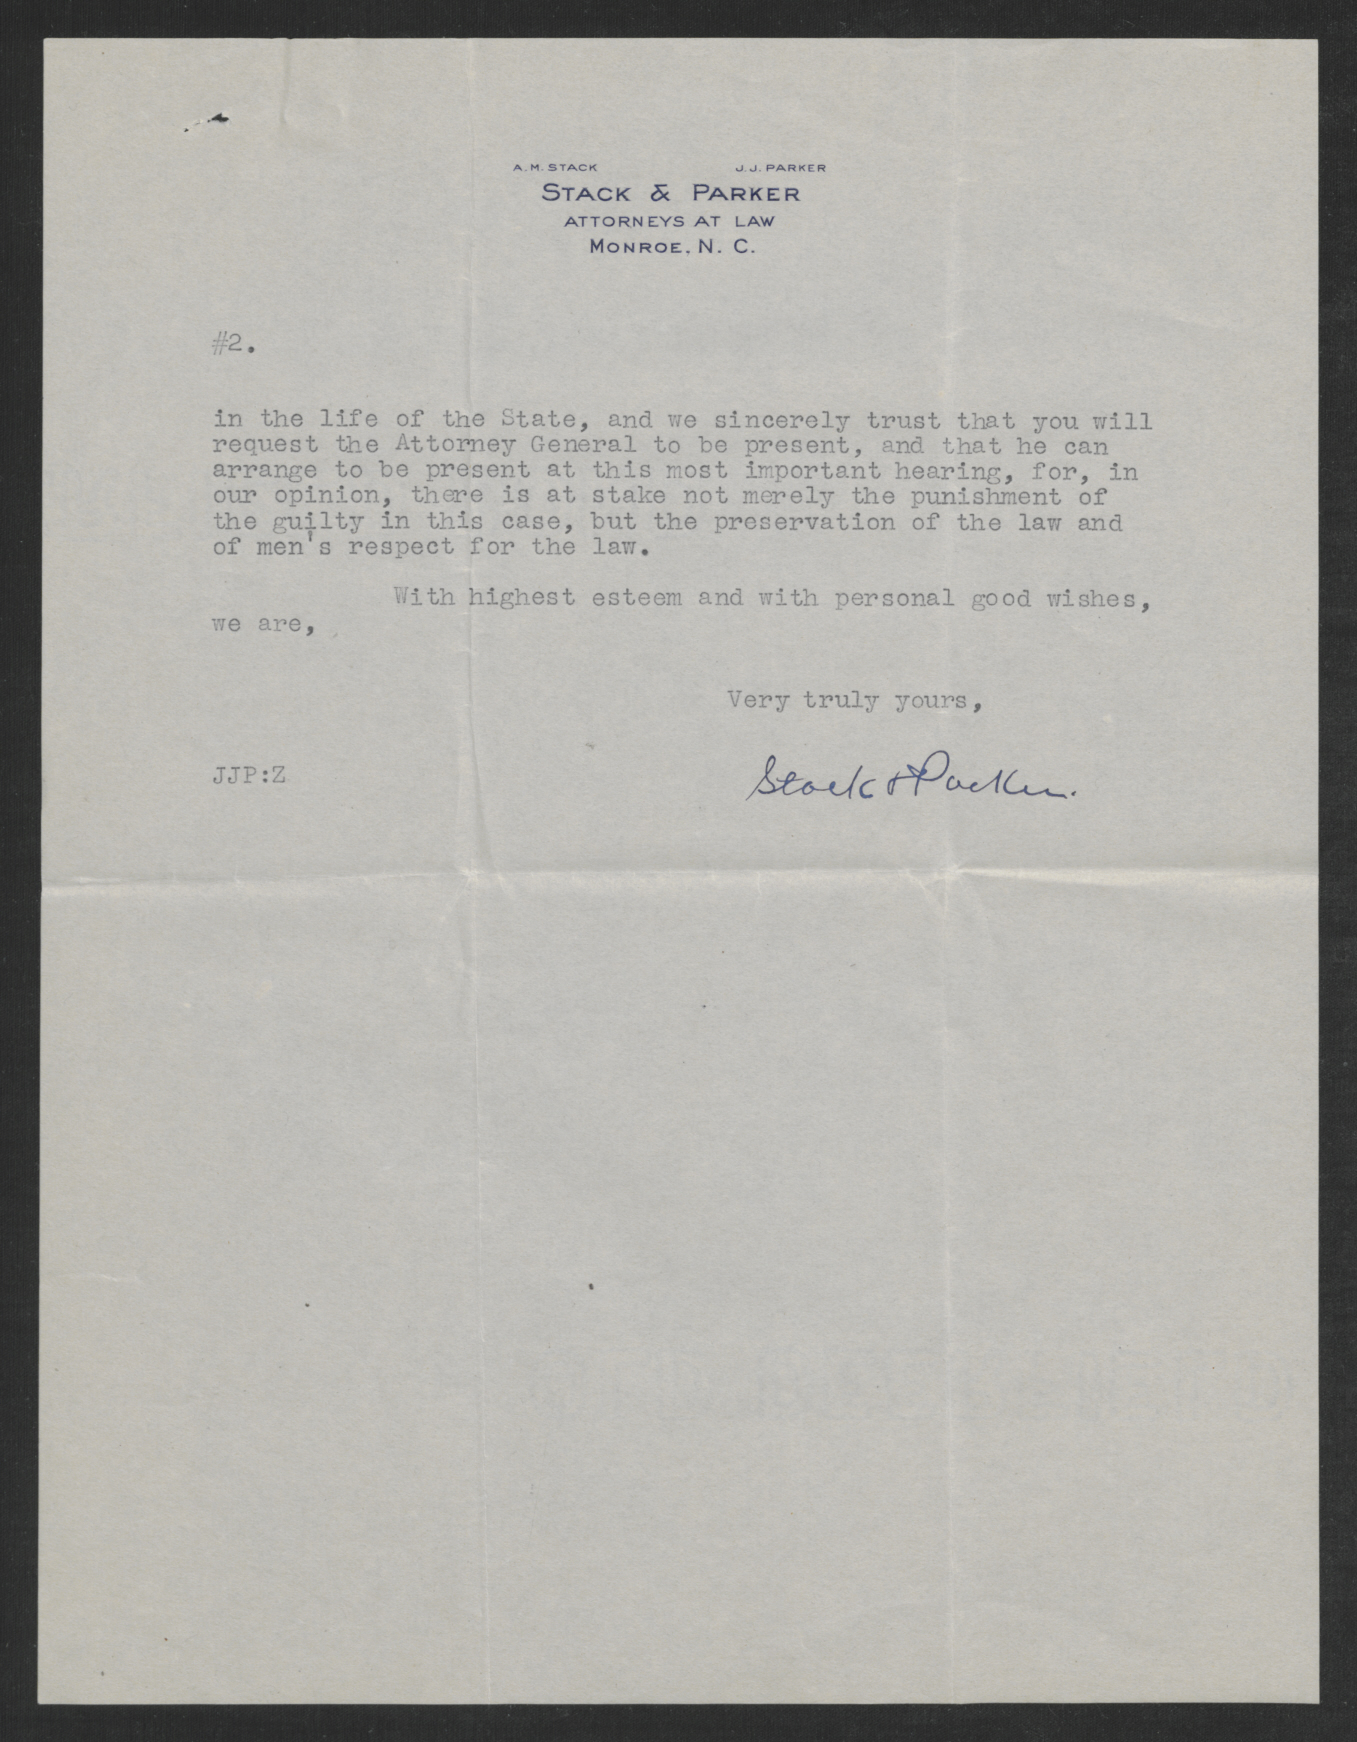 Letter from Amos M. Stack and John J. Parker to Thomas W. Bickett, October 16, 1919, page 2